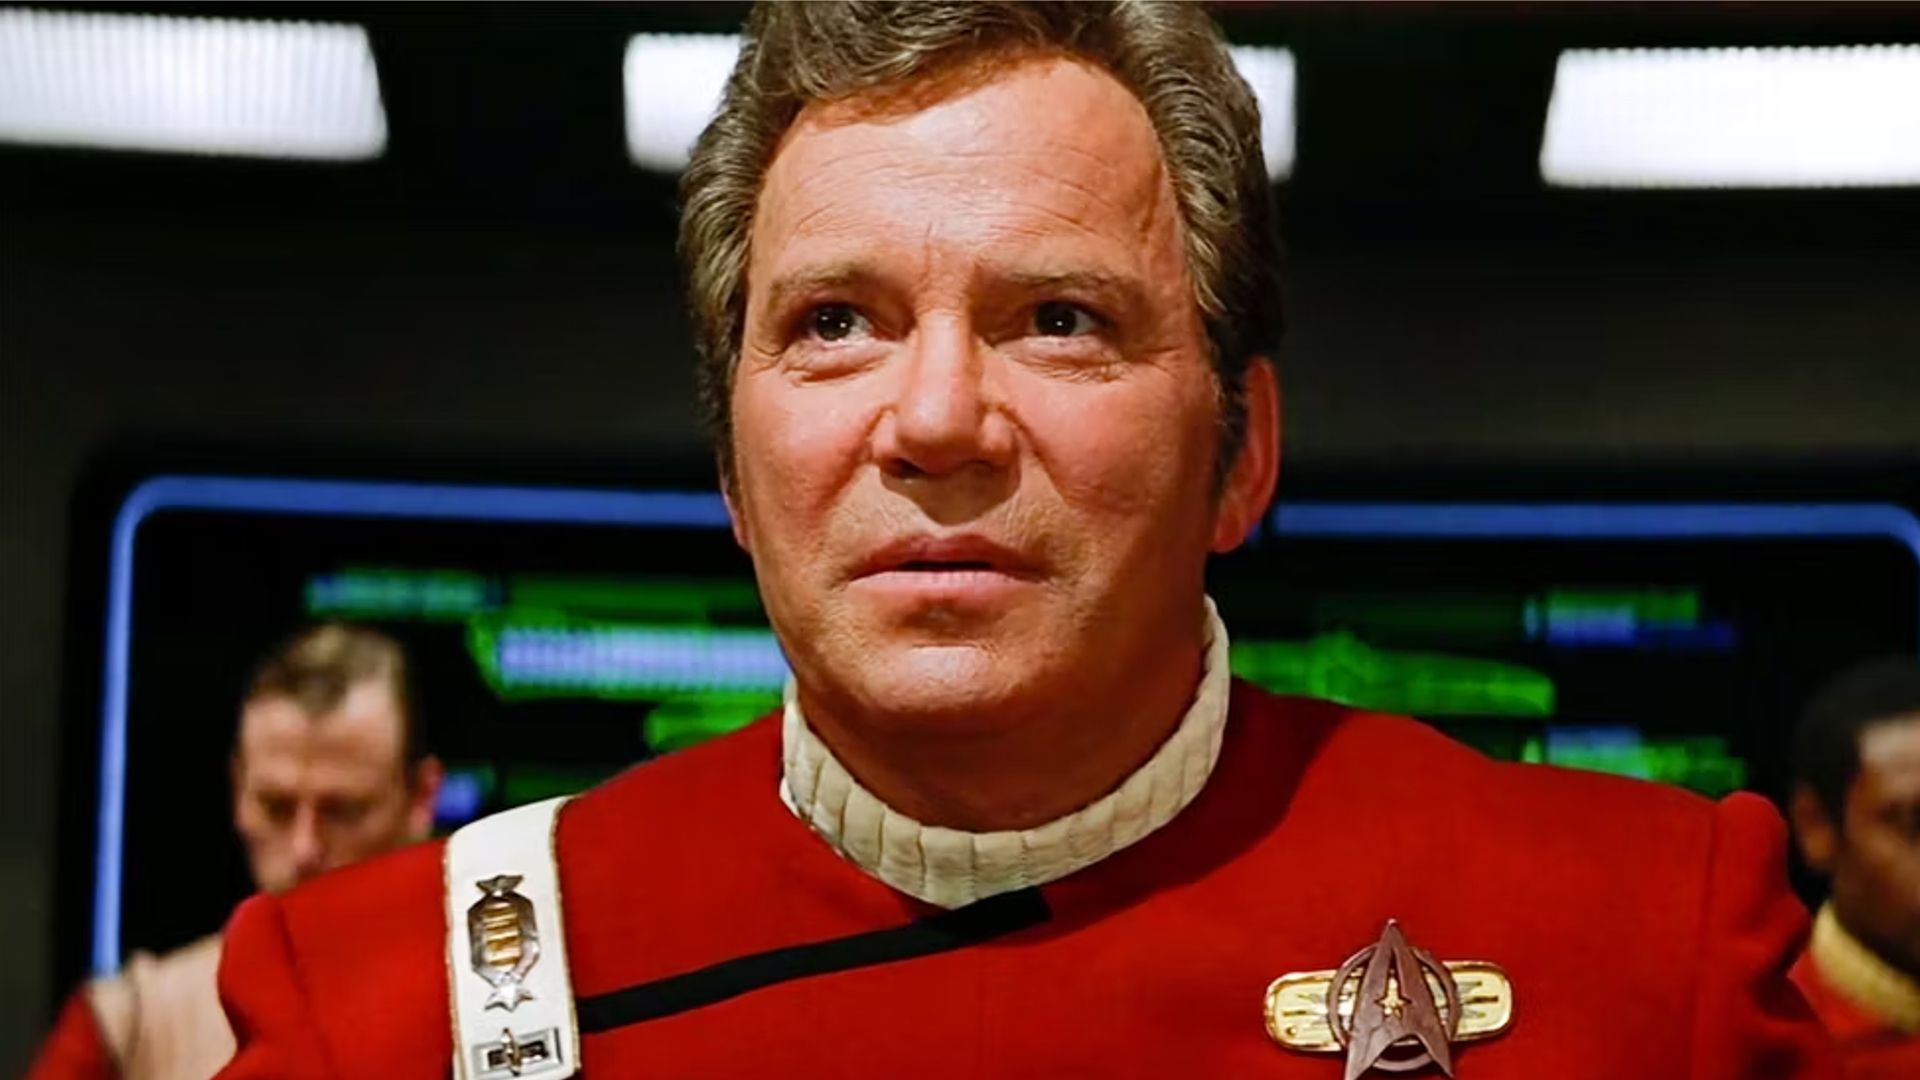 Star Trek’s William Shatner Is Willing to Go Where No One Has Gone ...